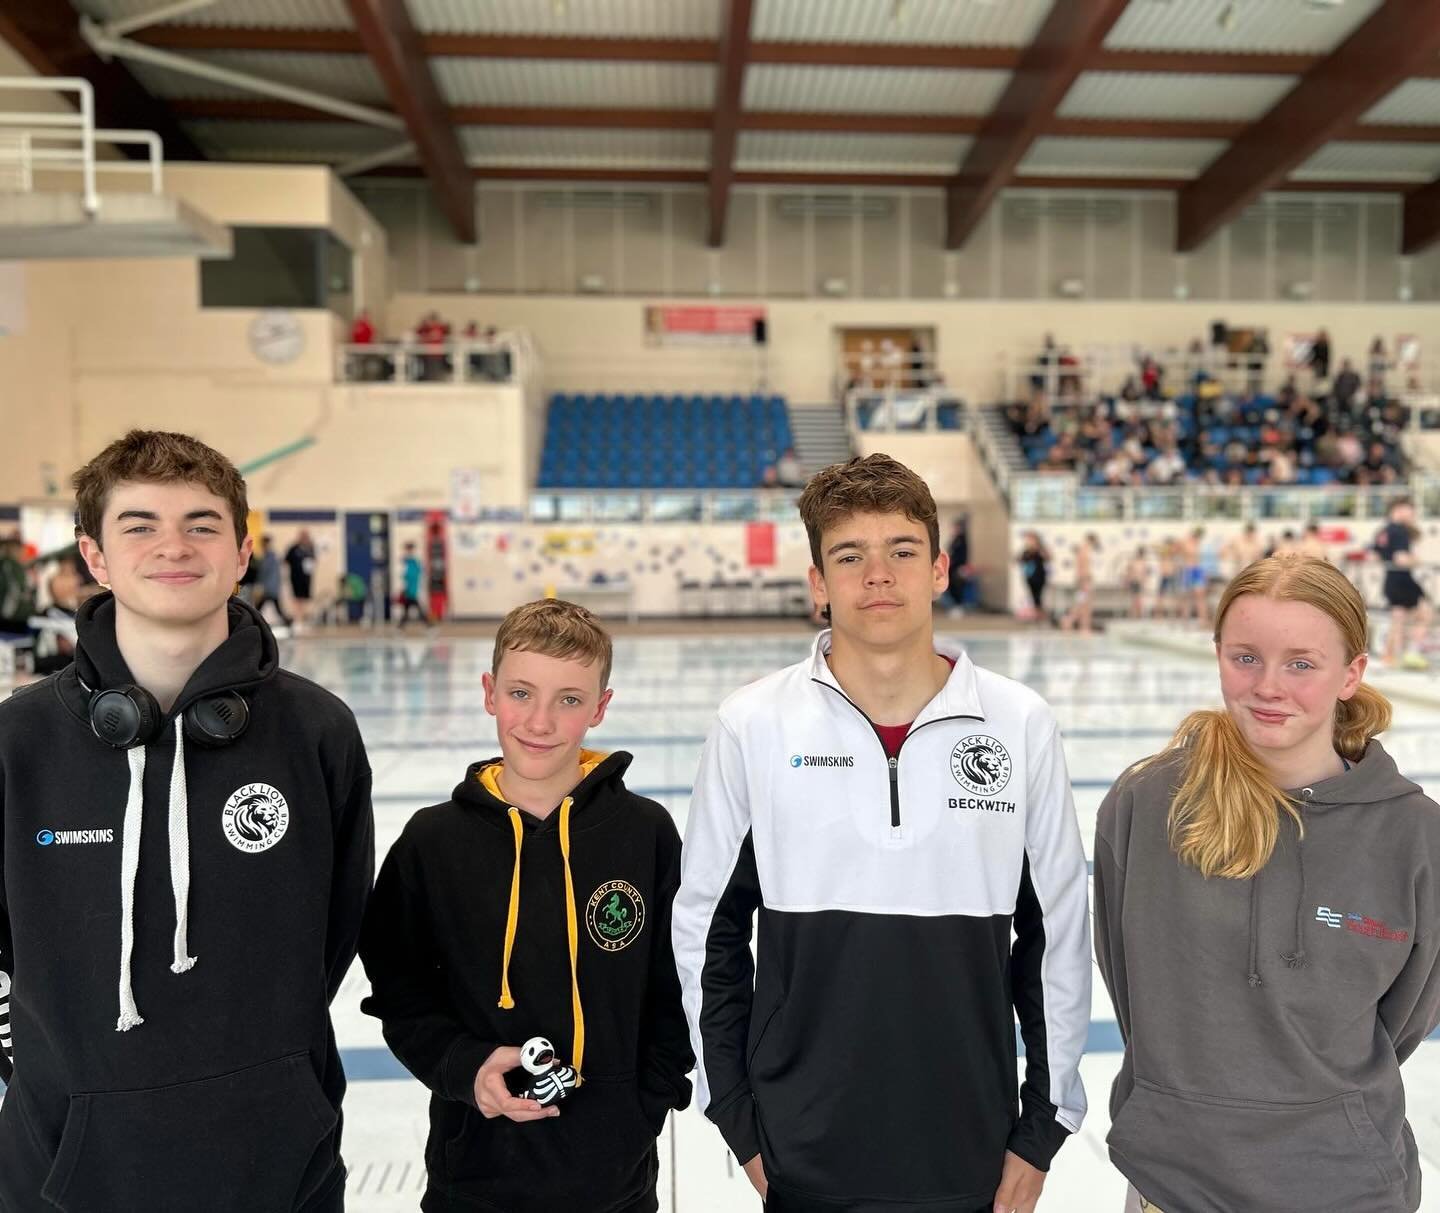 Good Luck to our 4 Lions at the Swim South East regional Championships this morning 💪🦁🏊🏻&zwj;♂️🏊🏻&zwj;♀️ swim fast Roar loud 🙌
Noah - 100 bs &amp; 400im
Jake - 100 bs
Ollie - 50 fly
Ellie - 100 fly